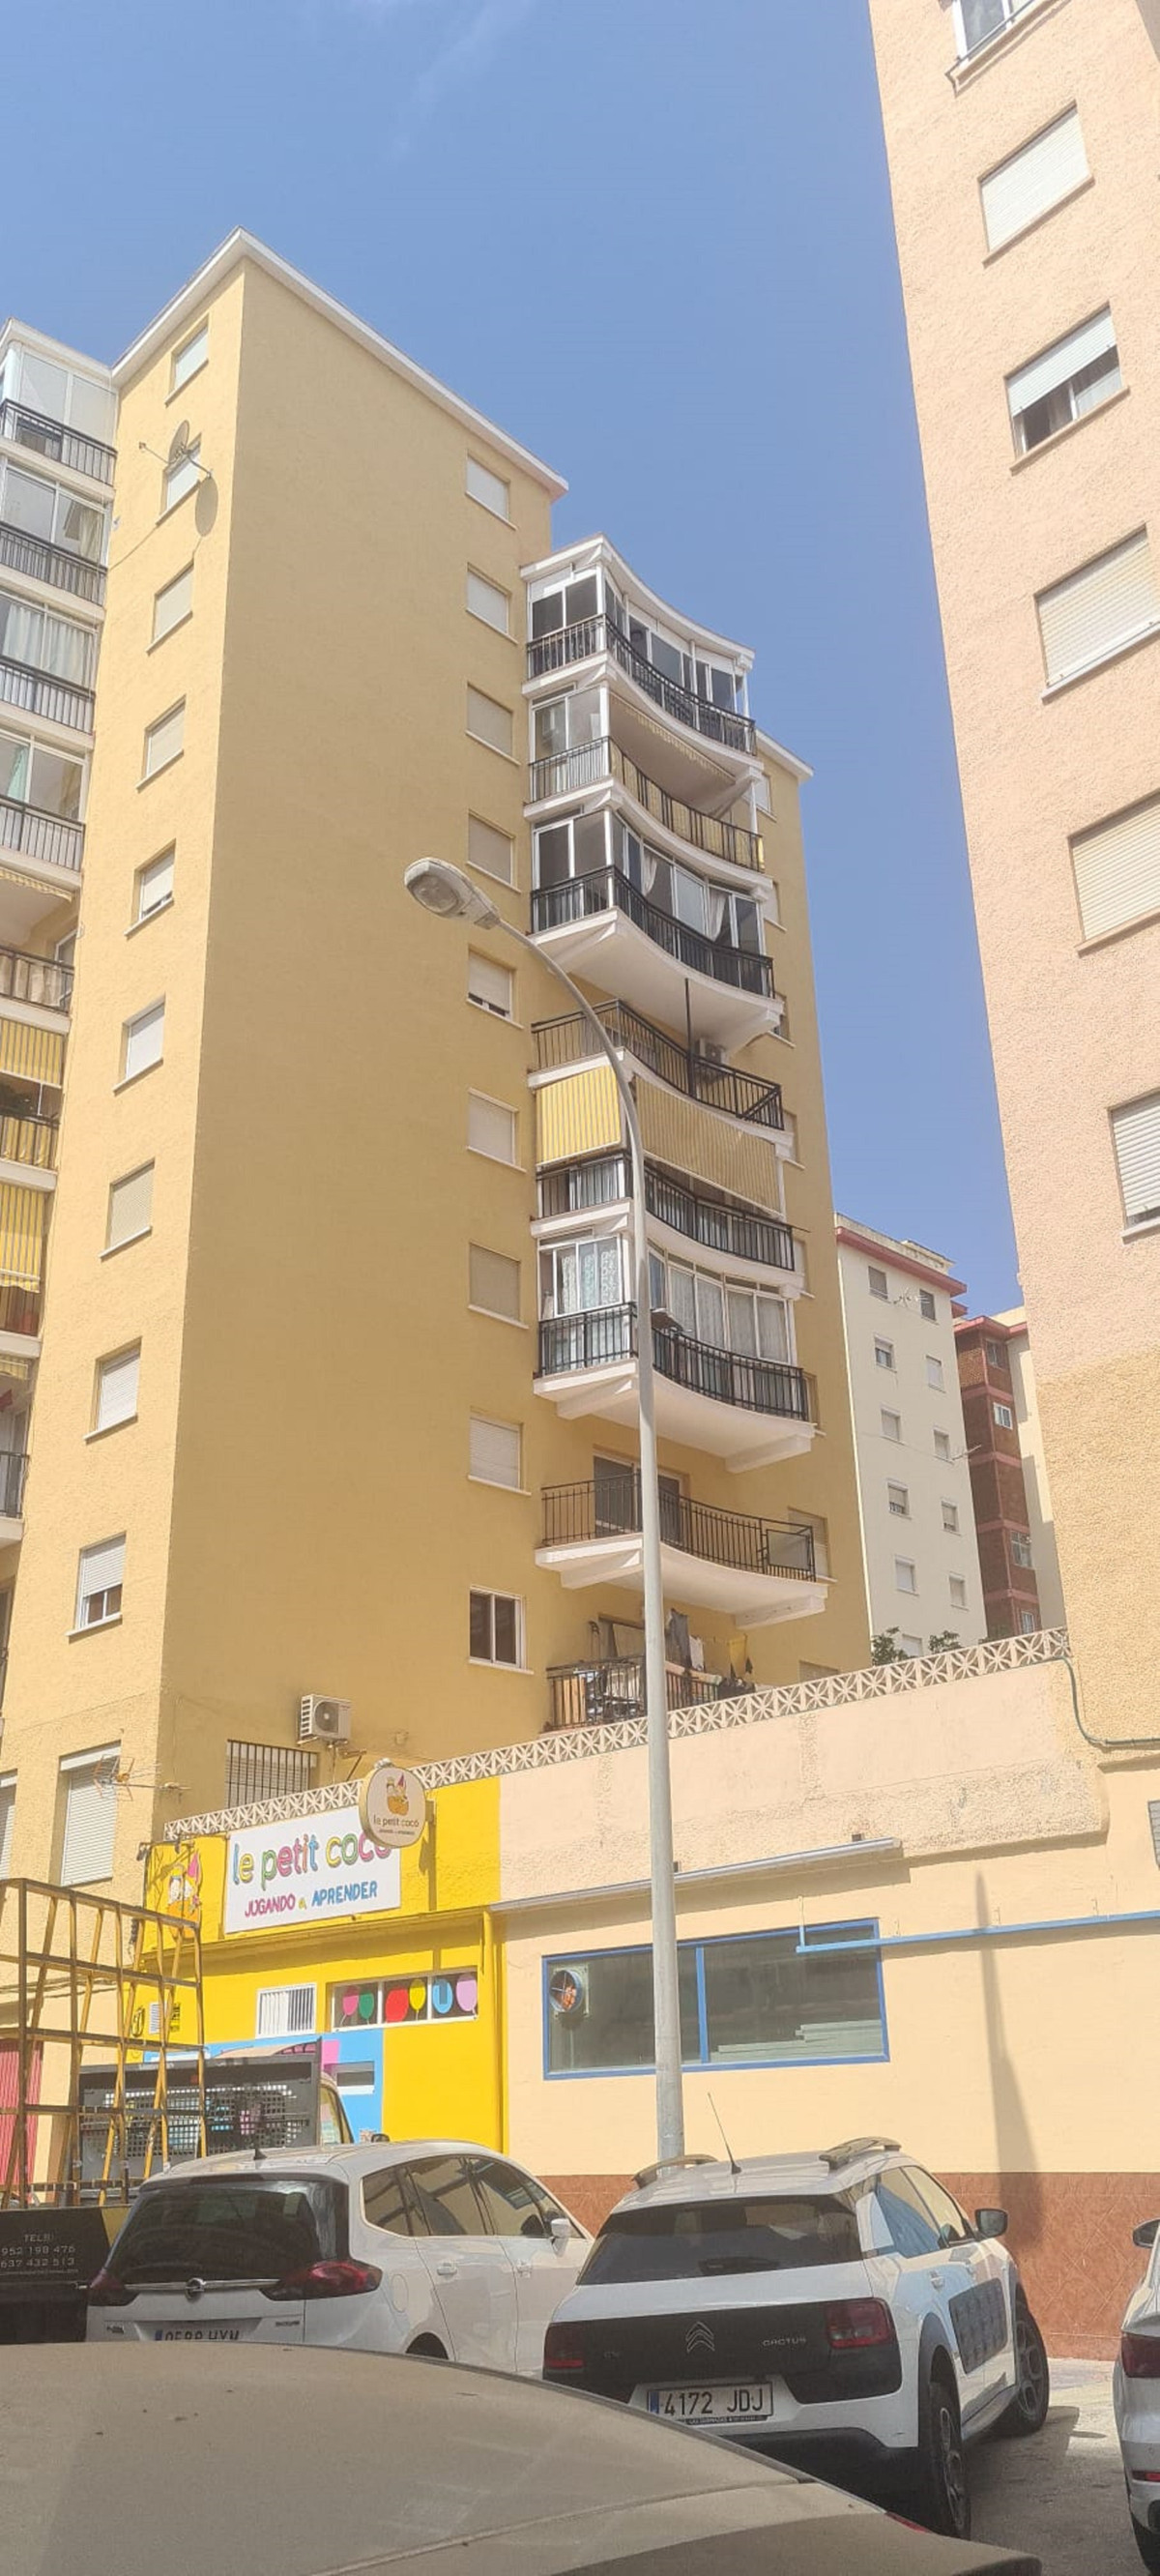 118/5000
Apartment located in the center of Fuengirola.
there are two bedrooms 1 bathroom, kitchen.
, Spain